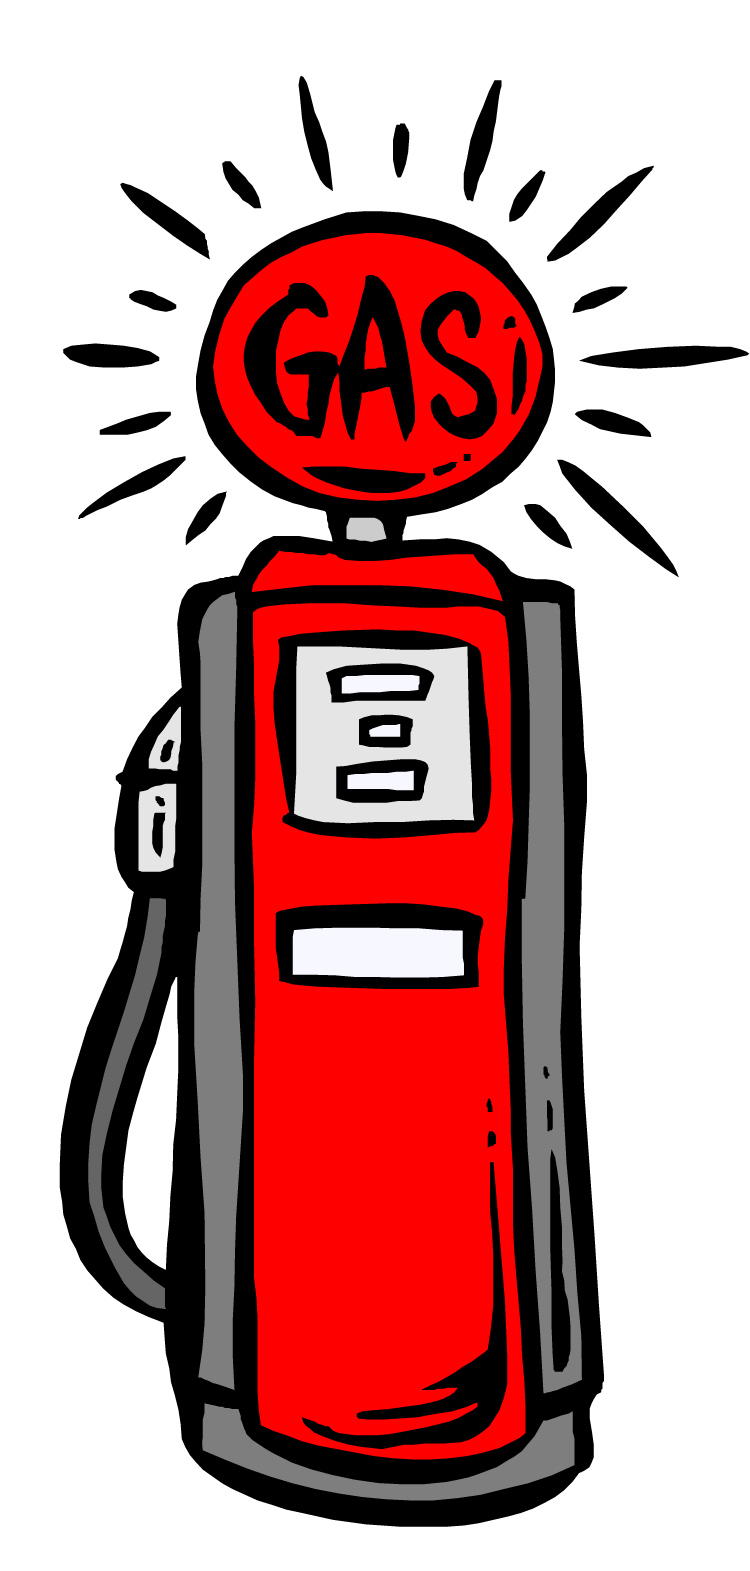 Pictures Of Gas Pumps - ClipArt Best